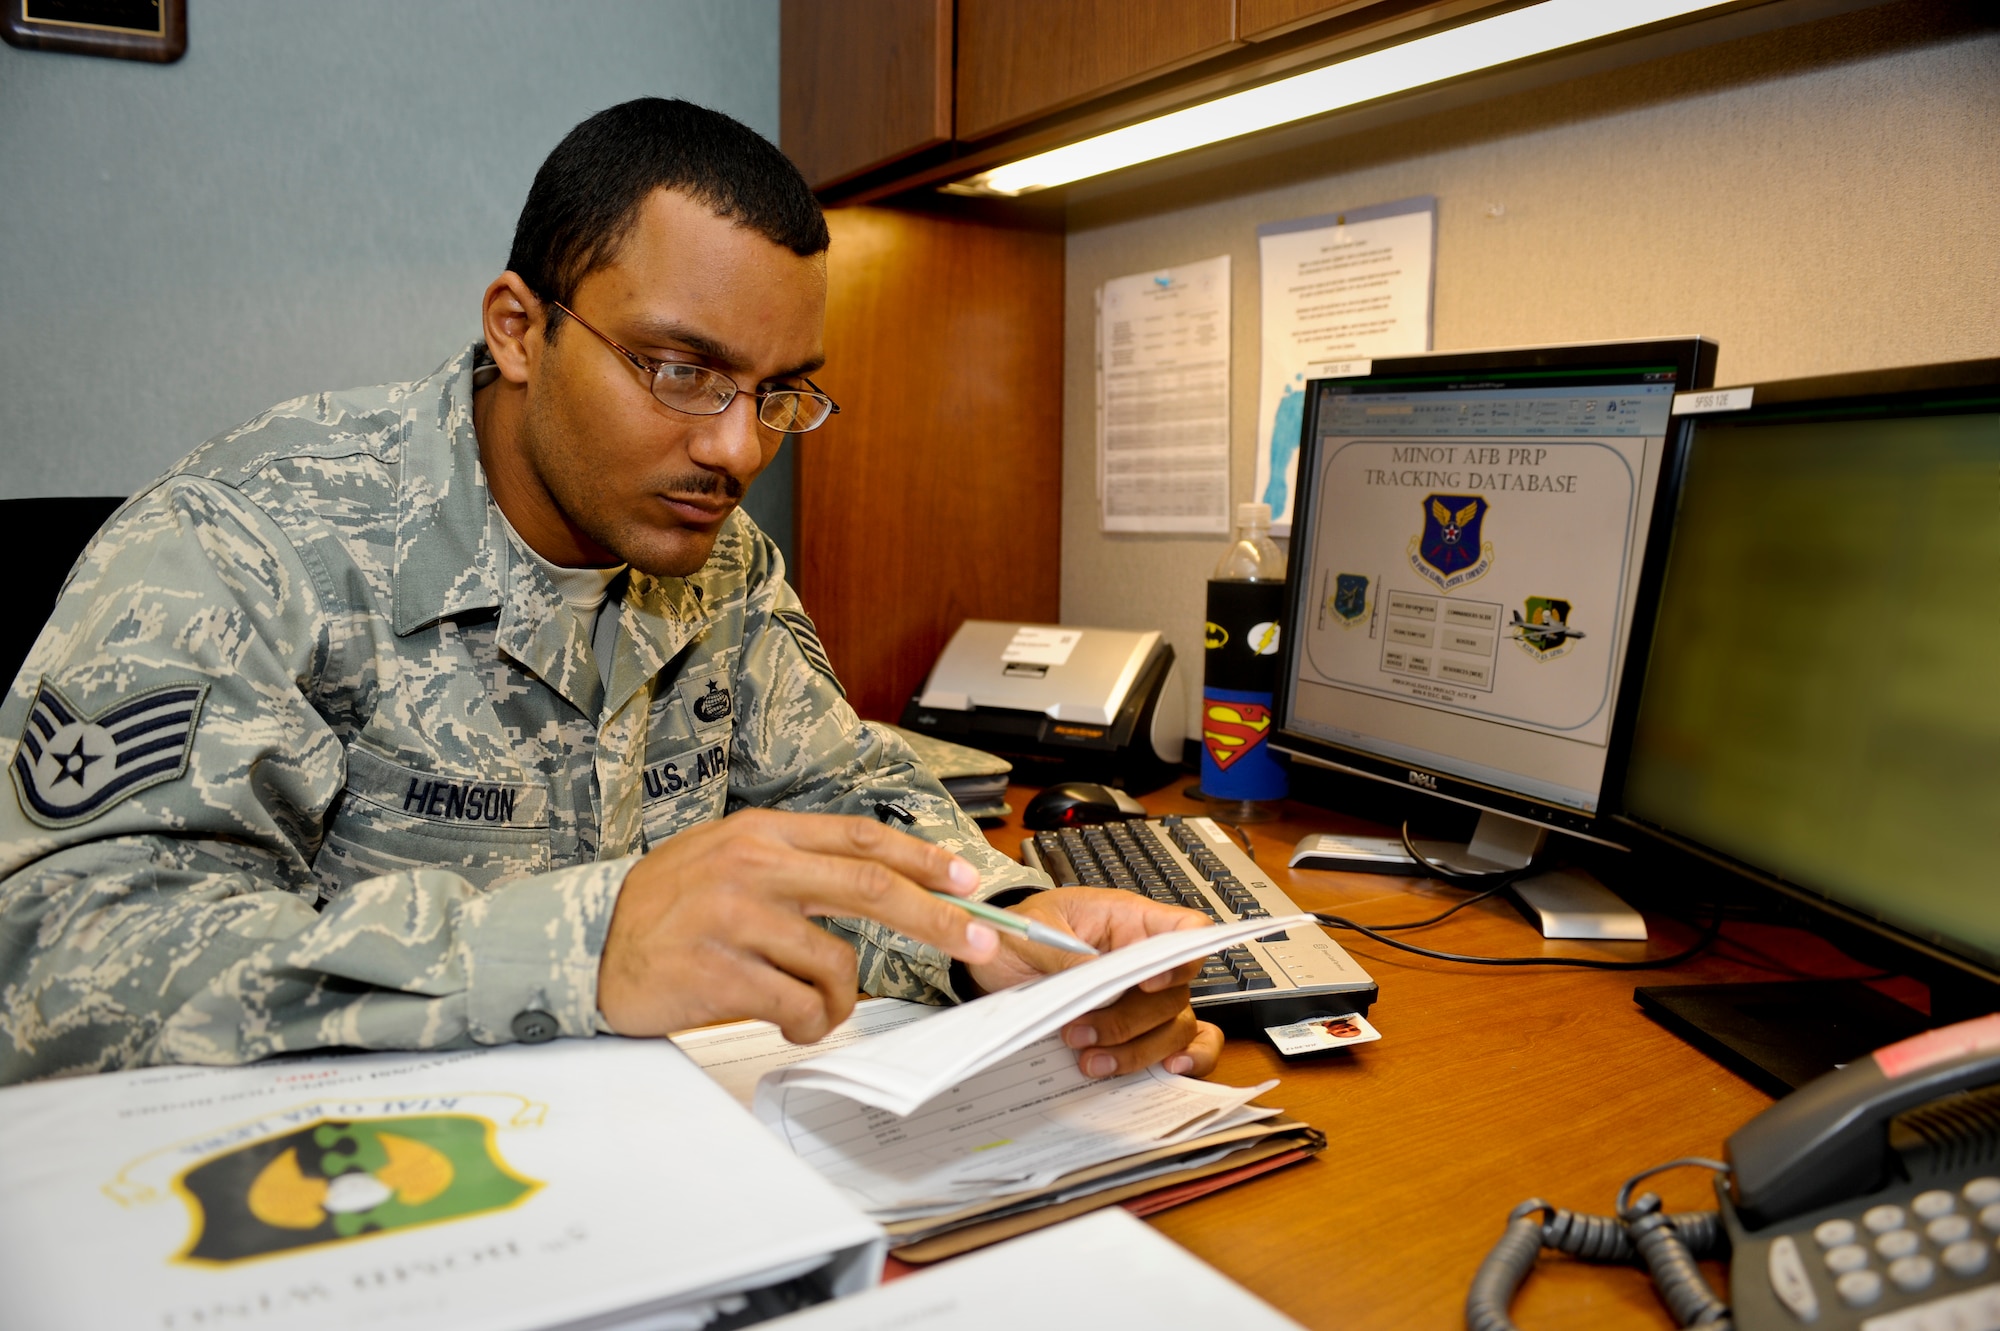 MINOT AIR FORCE BASE, N.D. -- Staff Sgt. Eric Henson, 5th Force Support Squadron base personnel reliability program monitor, inputs information into the Minot AFB PRP tracking database here Aug. 16. Minot is home to the largest PRP program in the Defense Department and home to the only dual-wing, nuclear base in the Air Force. (U.S. Air Force photo by Senior Airman Benjamin Stratton)